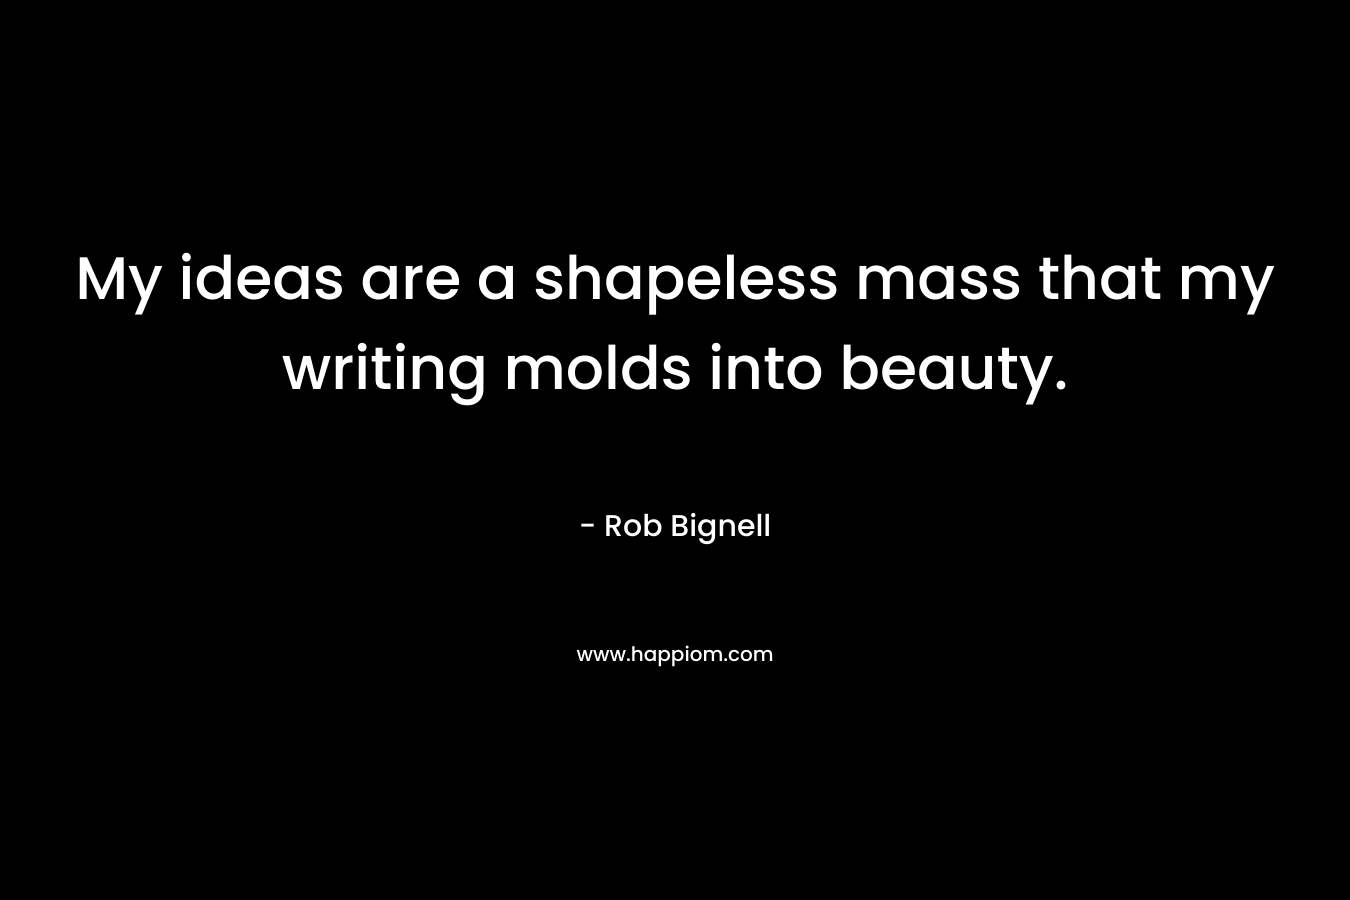 My ideas are a shapeless mass that my writing molds into beauty.